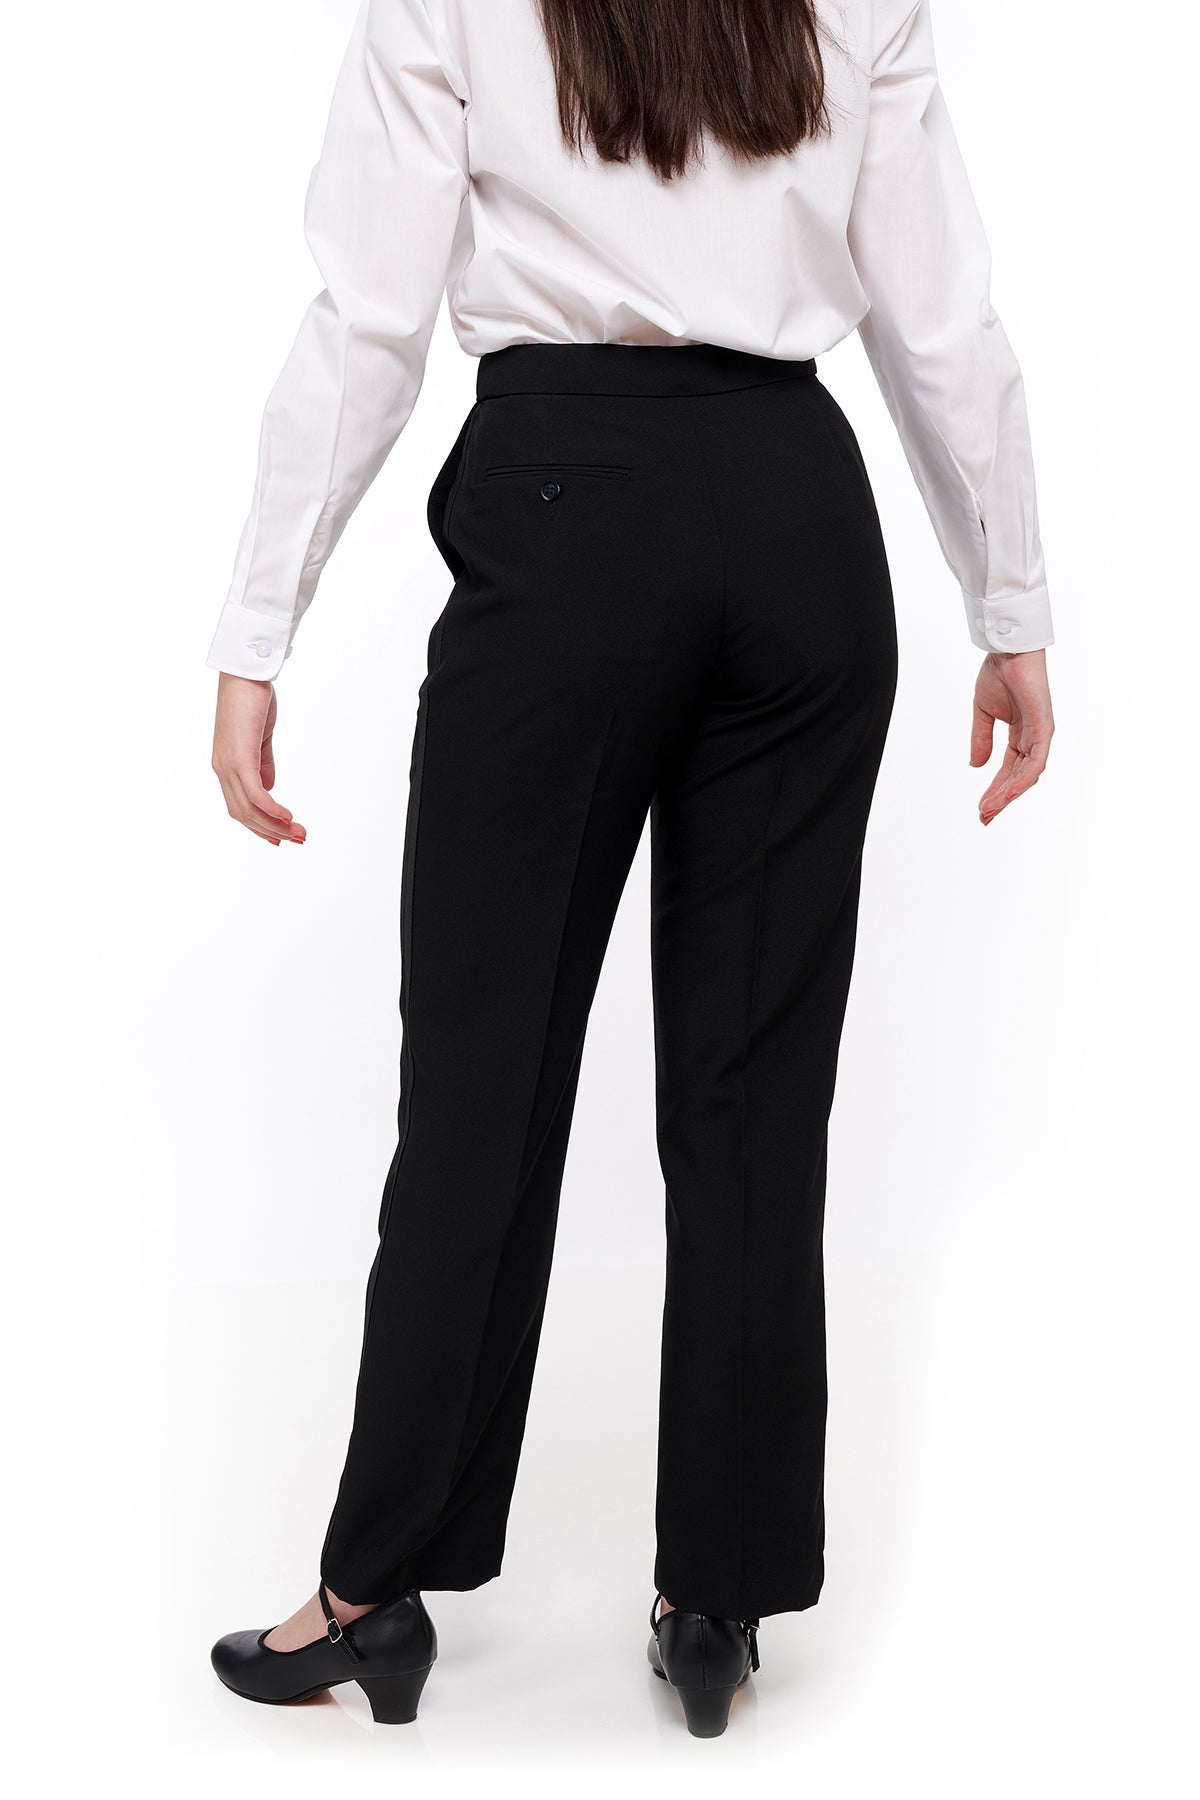 Chemistry Women Black Pleated Formal Trousers & Belt Price in India, Full  Specifications & Offers | DTashion.com